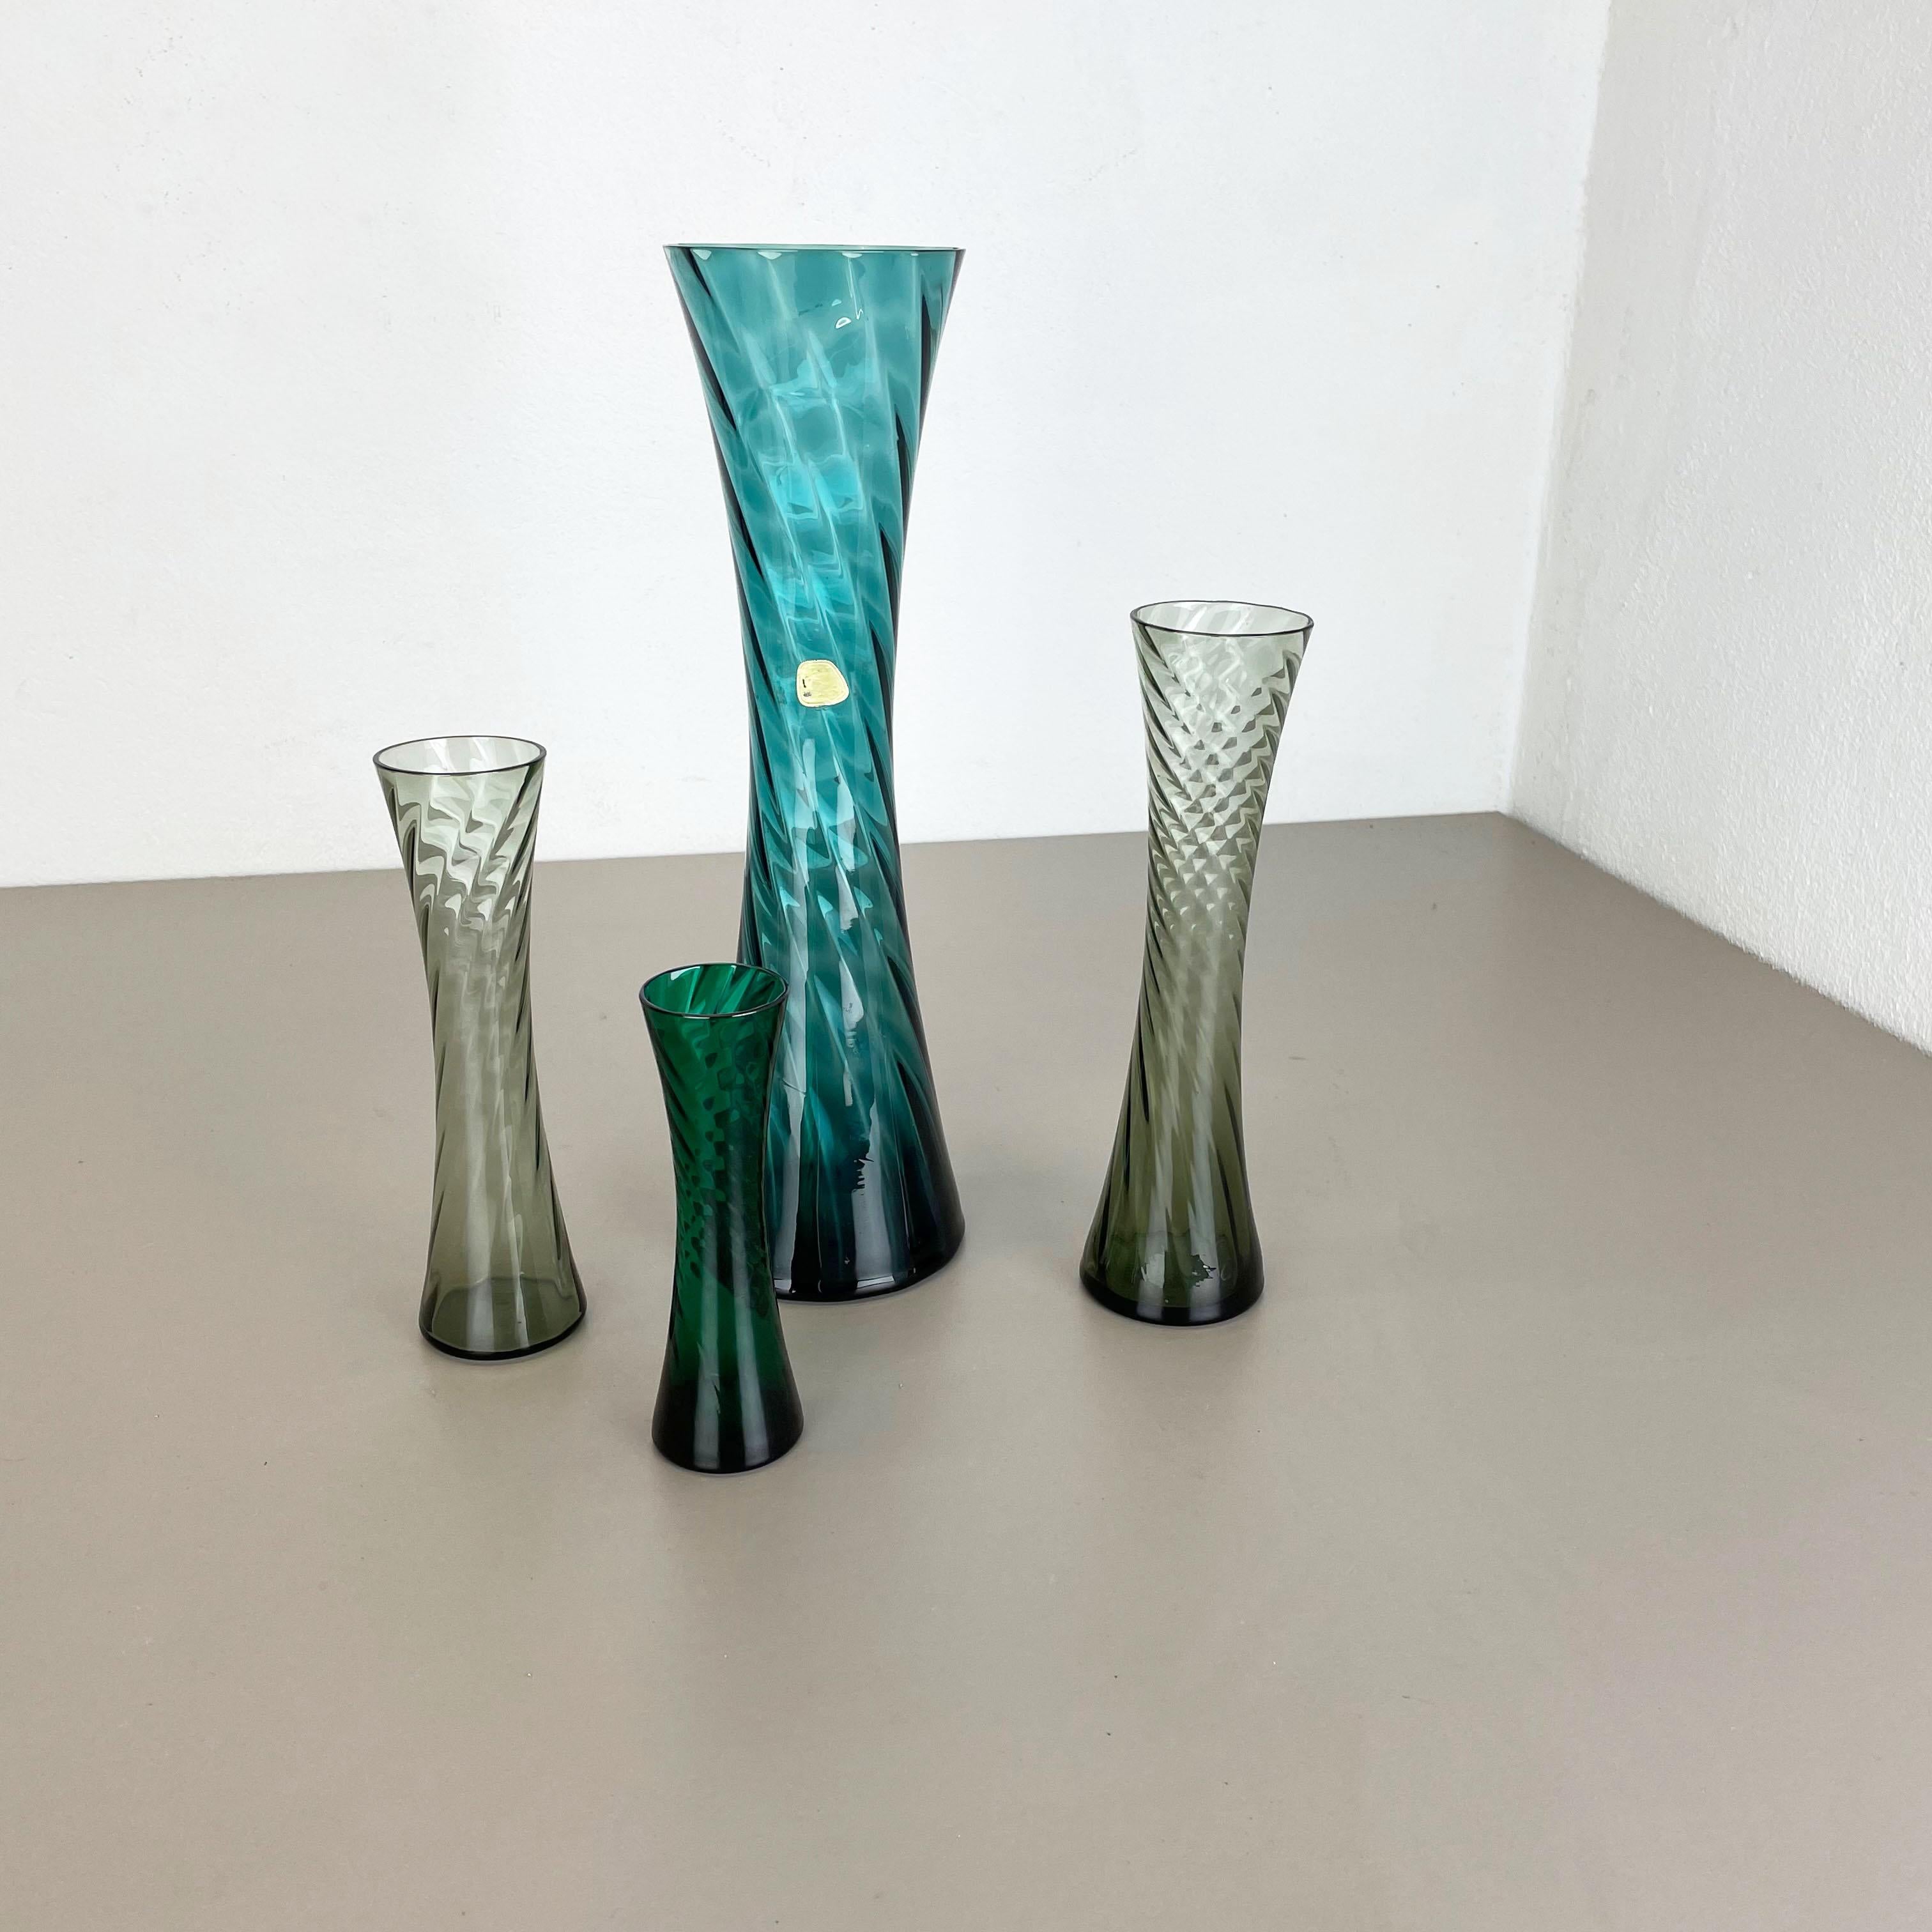 Article:

Set of four crystal vases

Producer:

Alfred Taube Kristallglasfabrik, Germany



Decade:

1960s


  

These original vintage vases was produced in the 1960s in Germany. It is made of handblown crystal glass, produced by